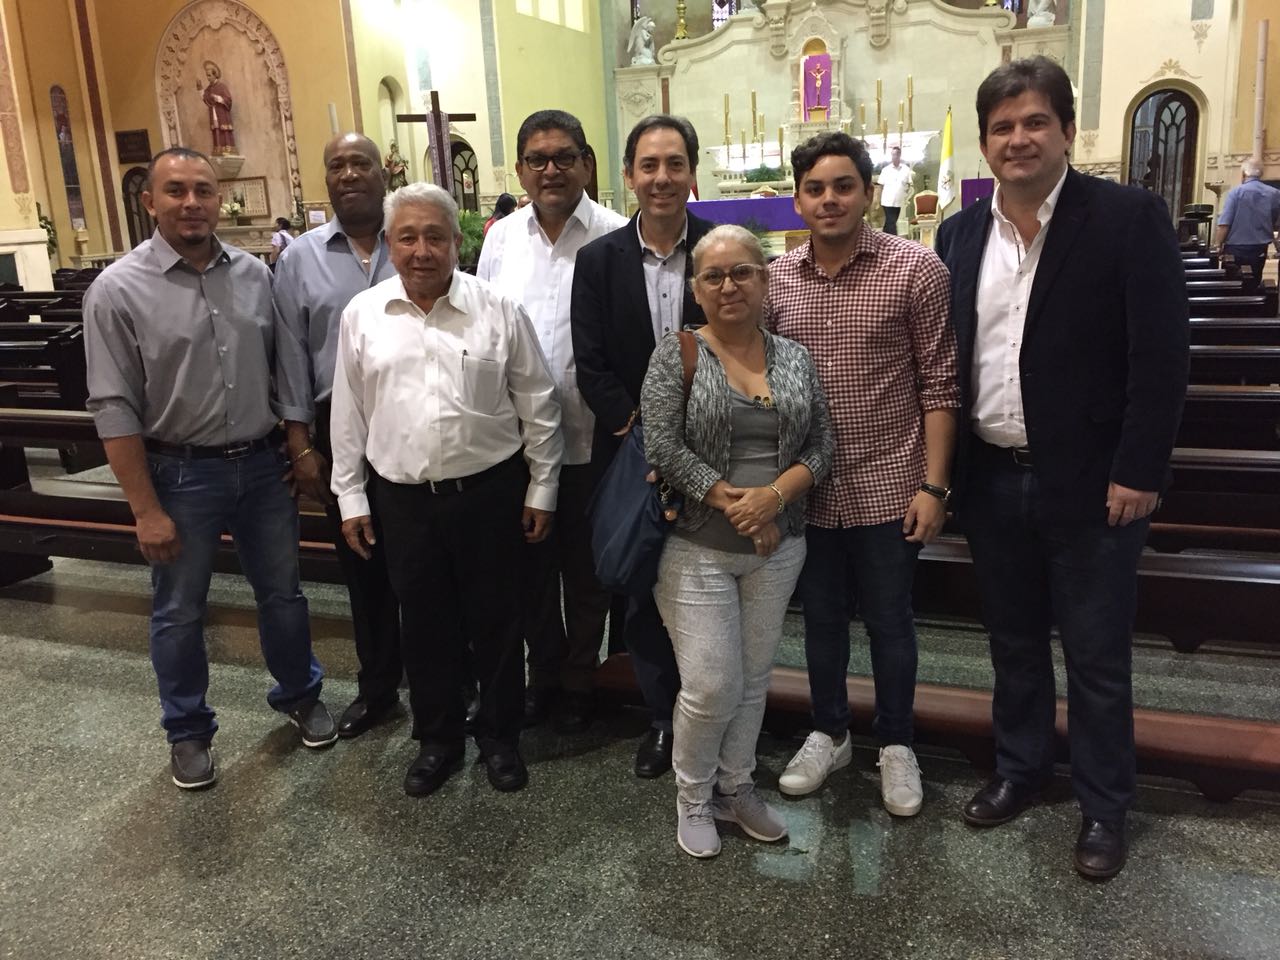 A mass was held in honor of Gilberto Mendoza in Panama